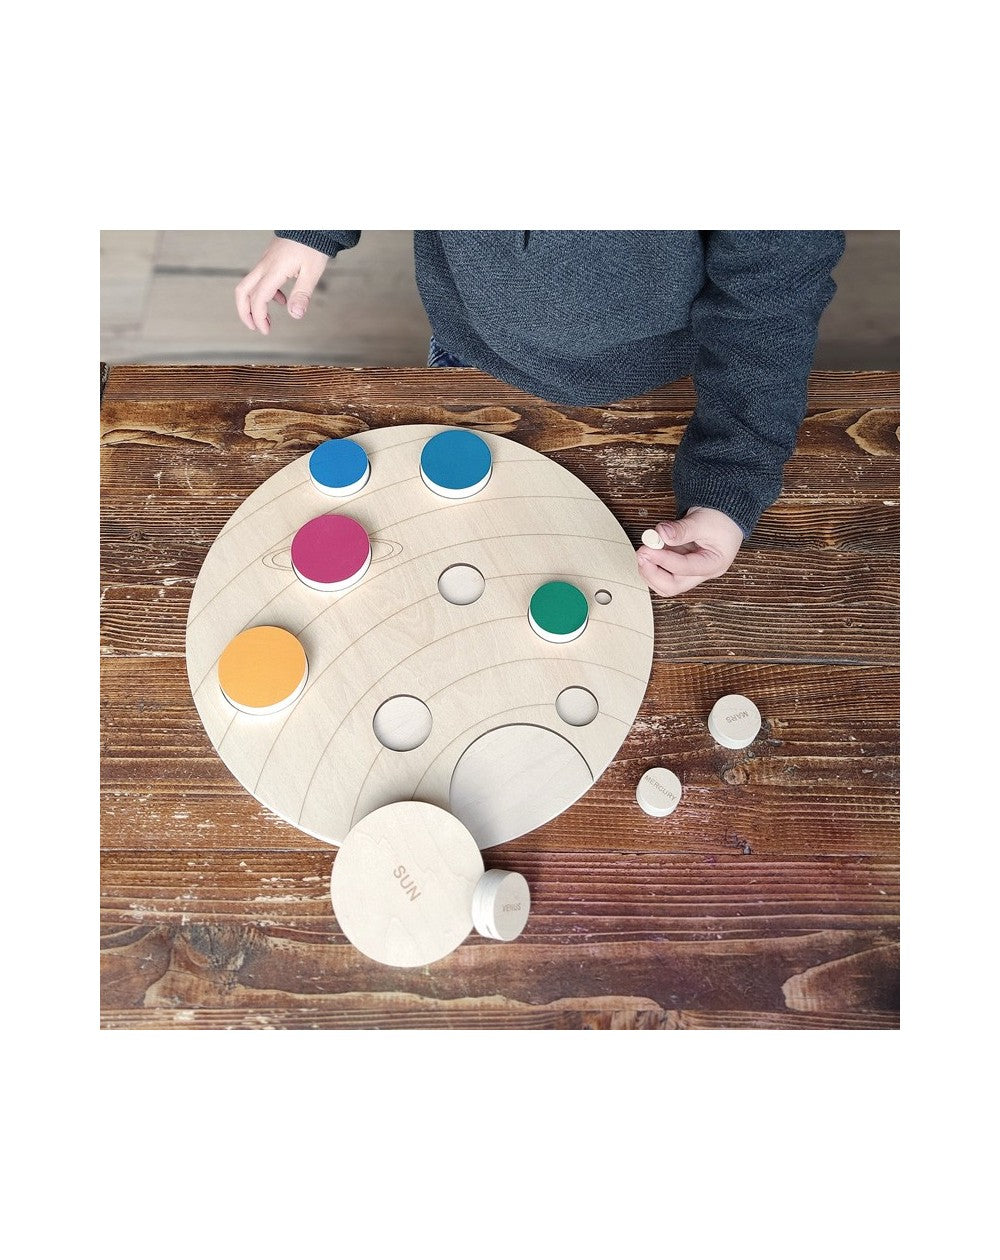 Wooden solar system puzzle